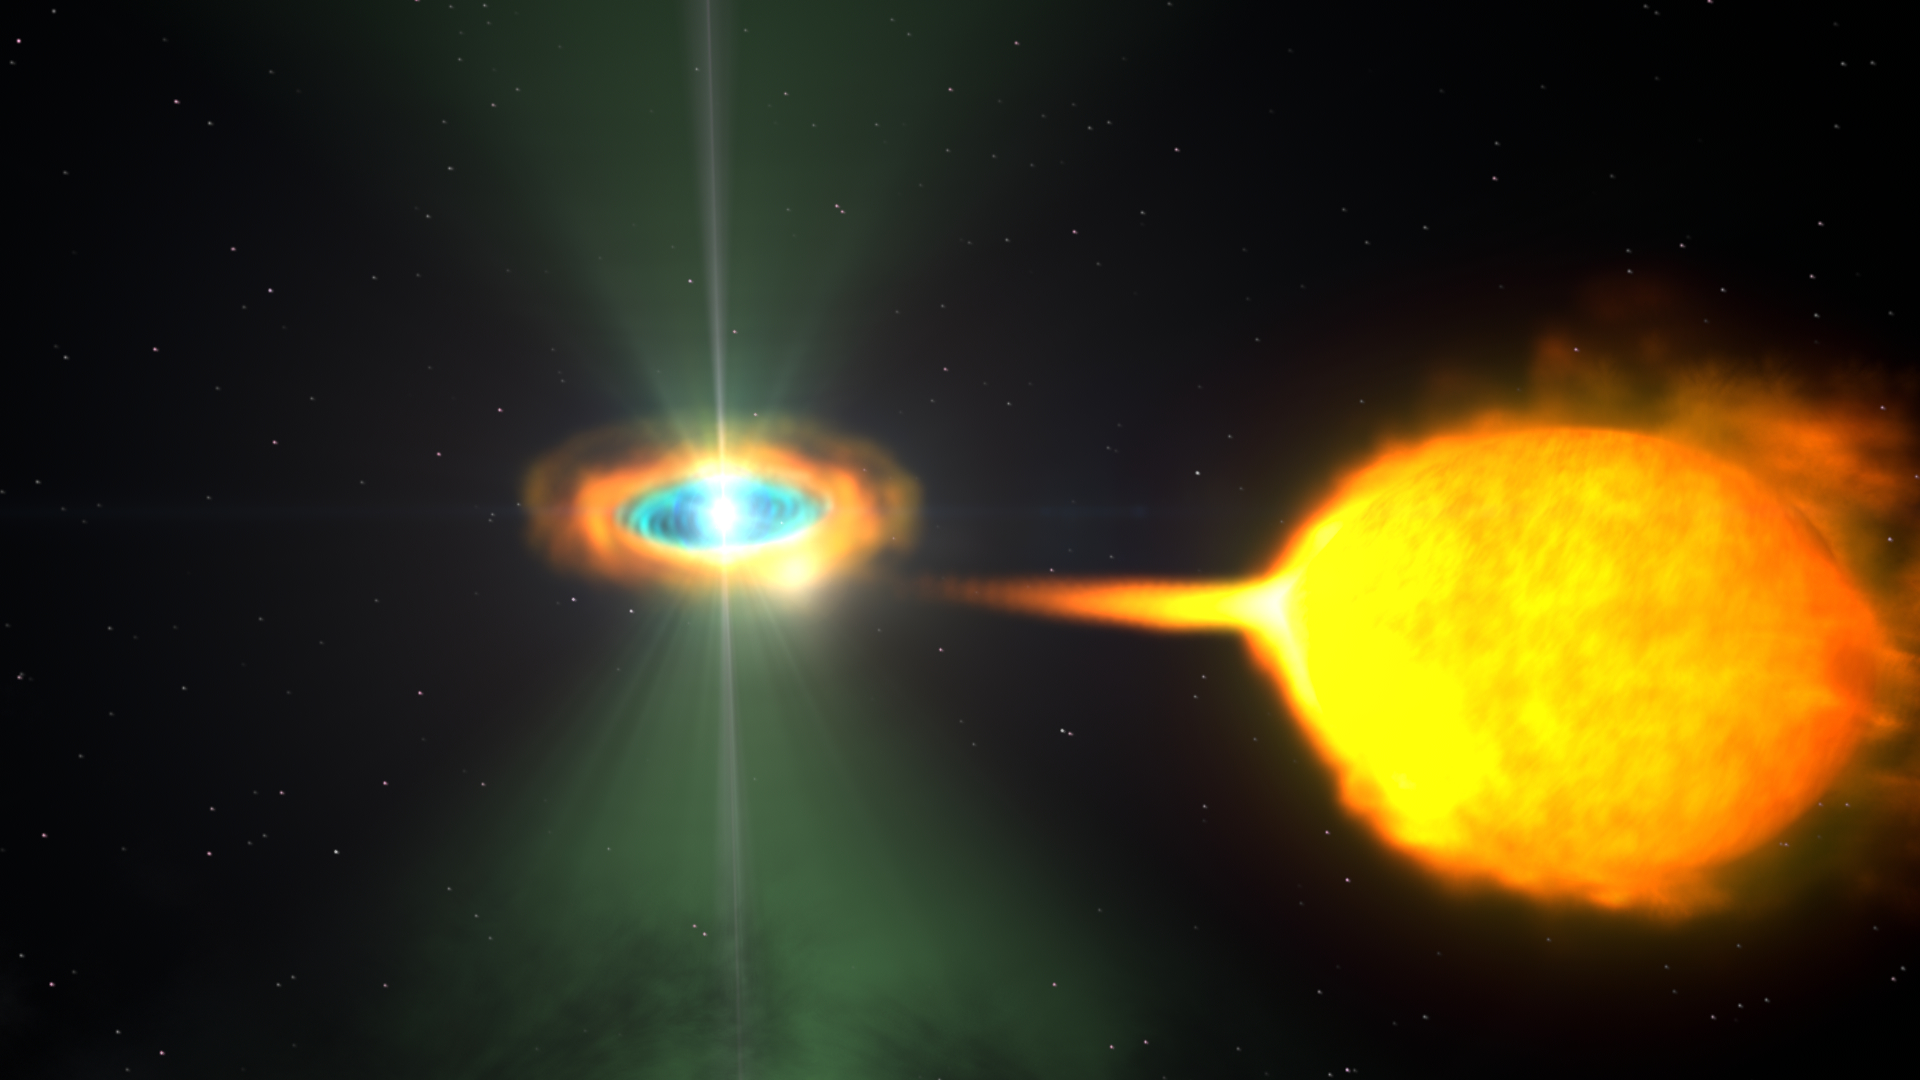 Narrated video.  Zoom into an artist's rendering of AY Sextantis, a binary star system whose pulsar switched from radio emissions to high-energy gamma rays in 2013. This transition likely means the pulsar's spin-up process is nearing its end.Credit: NASA's Goddard Space Flight CenterWatch this video on the NASA Goddard YouTube channel.For complete transcript, click here.